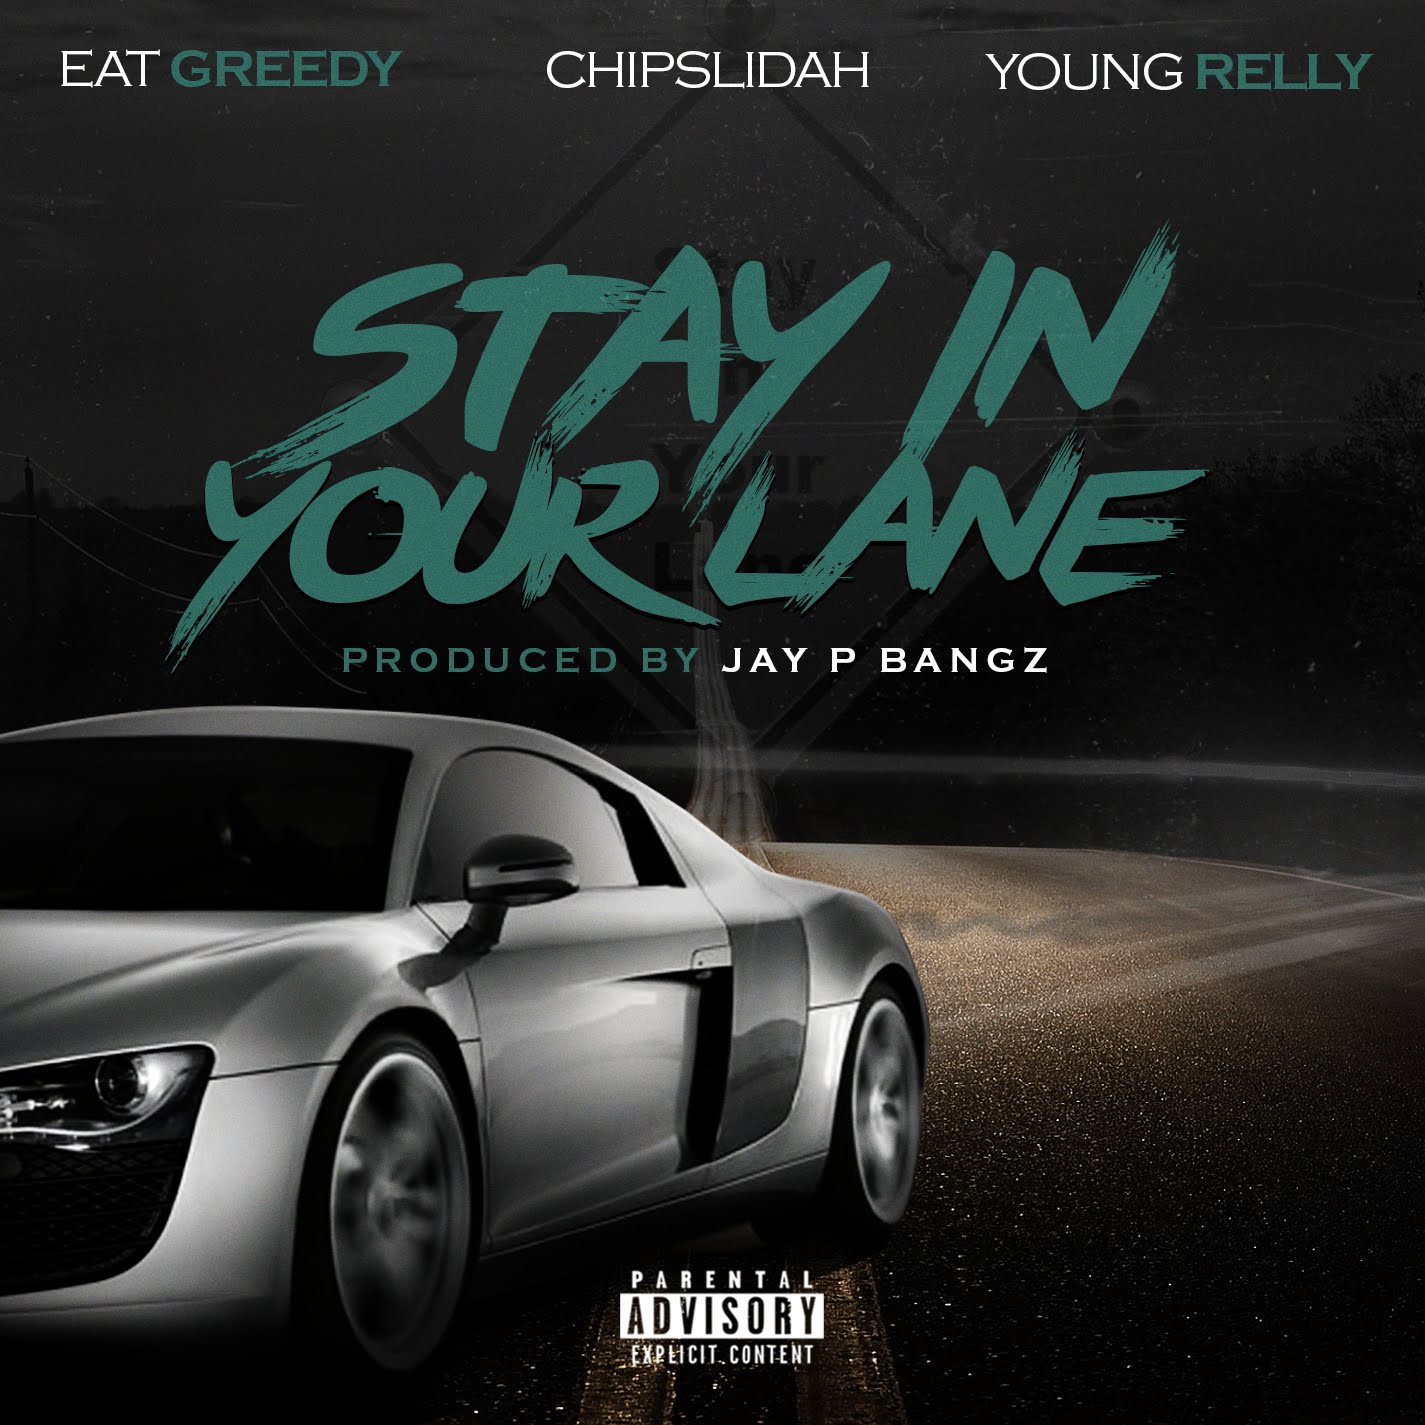 Eat Greedy featuring Chipslidah and Young Relly - "Stay In Your Lane"